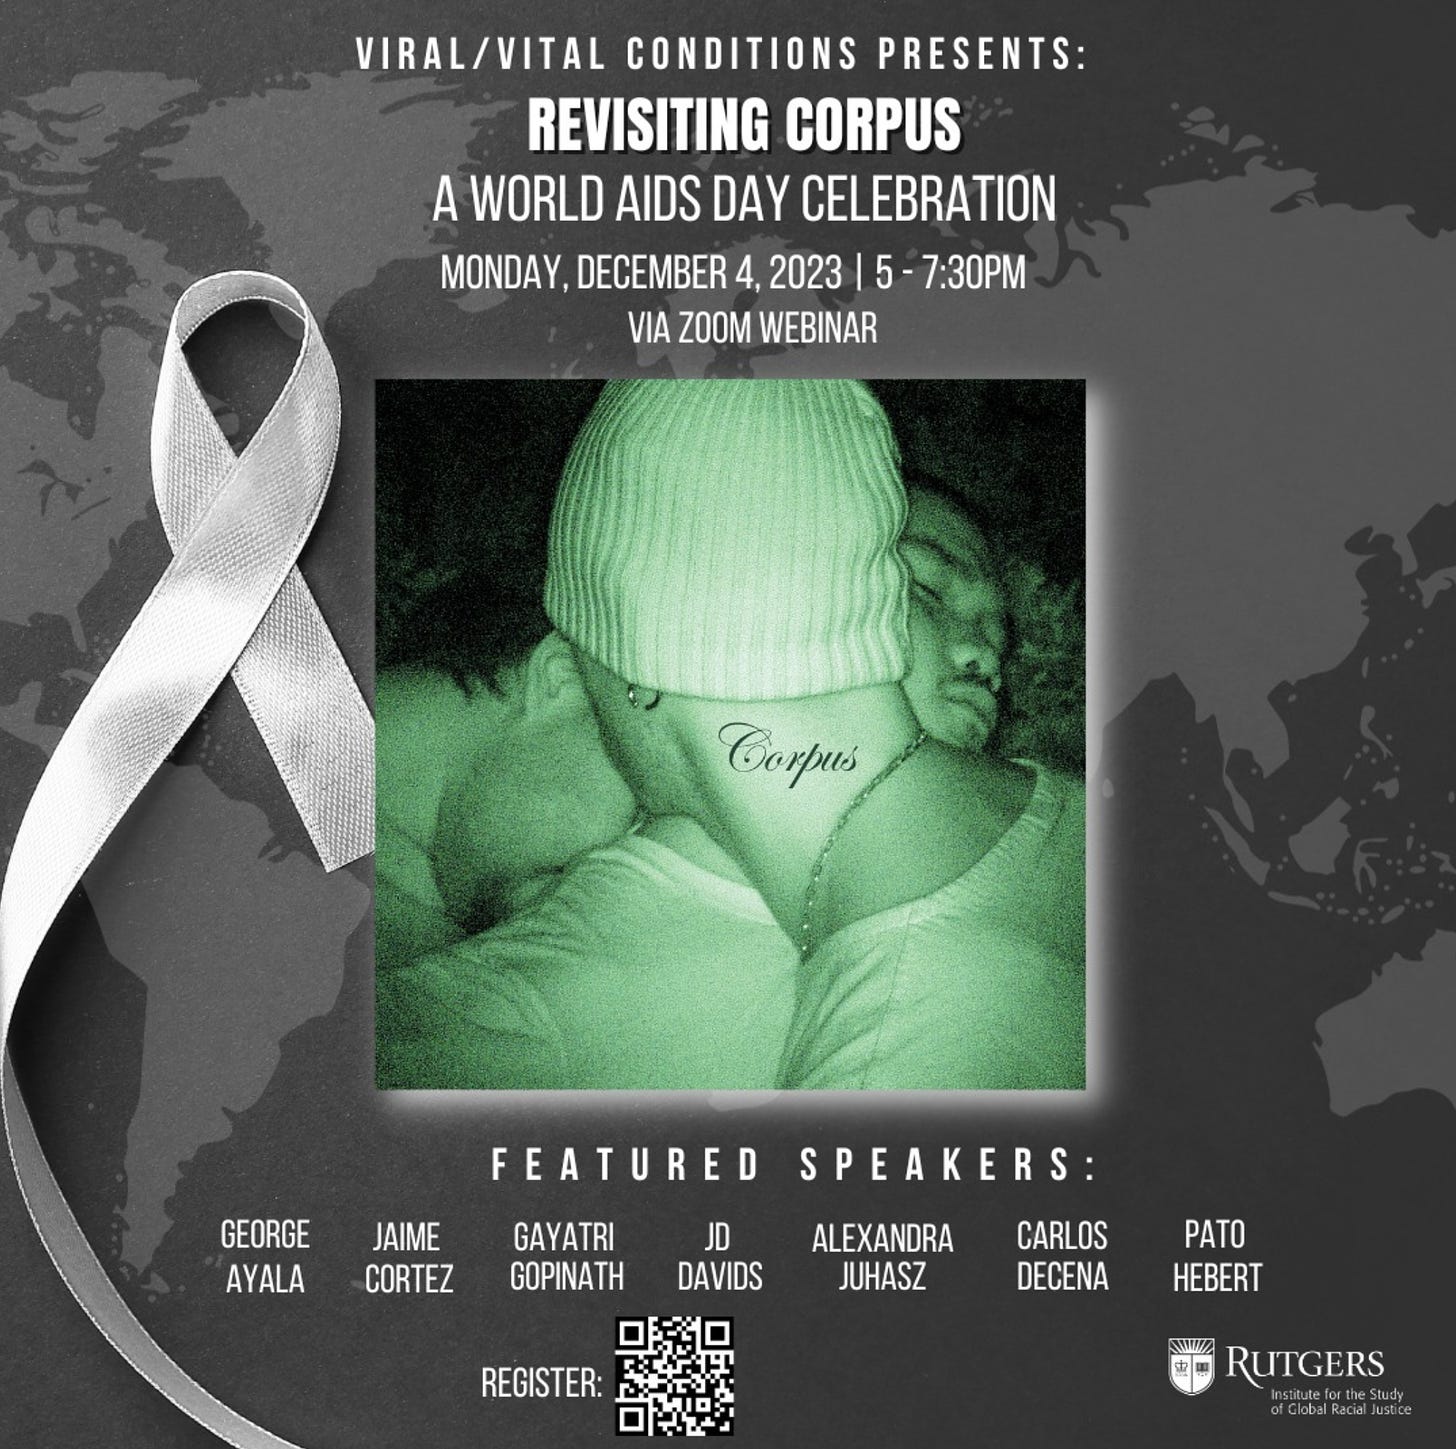 There’s a map of the world and a ribbon in greyscale, with event details. In the center, a photo taken in green night-vision shows masc people dancing and embracing, with a cursive word “Corpus” looking like it’s a neck tattoo on one of the dancers.